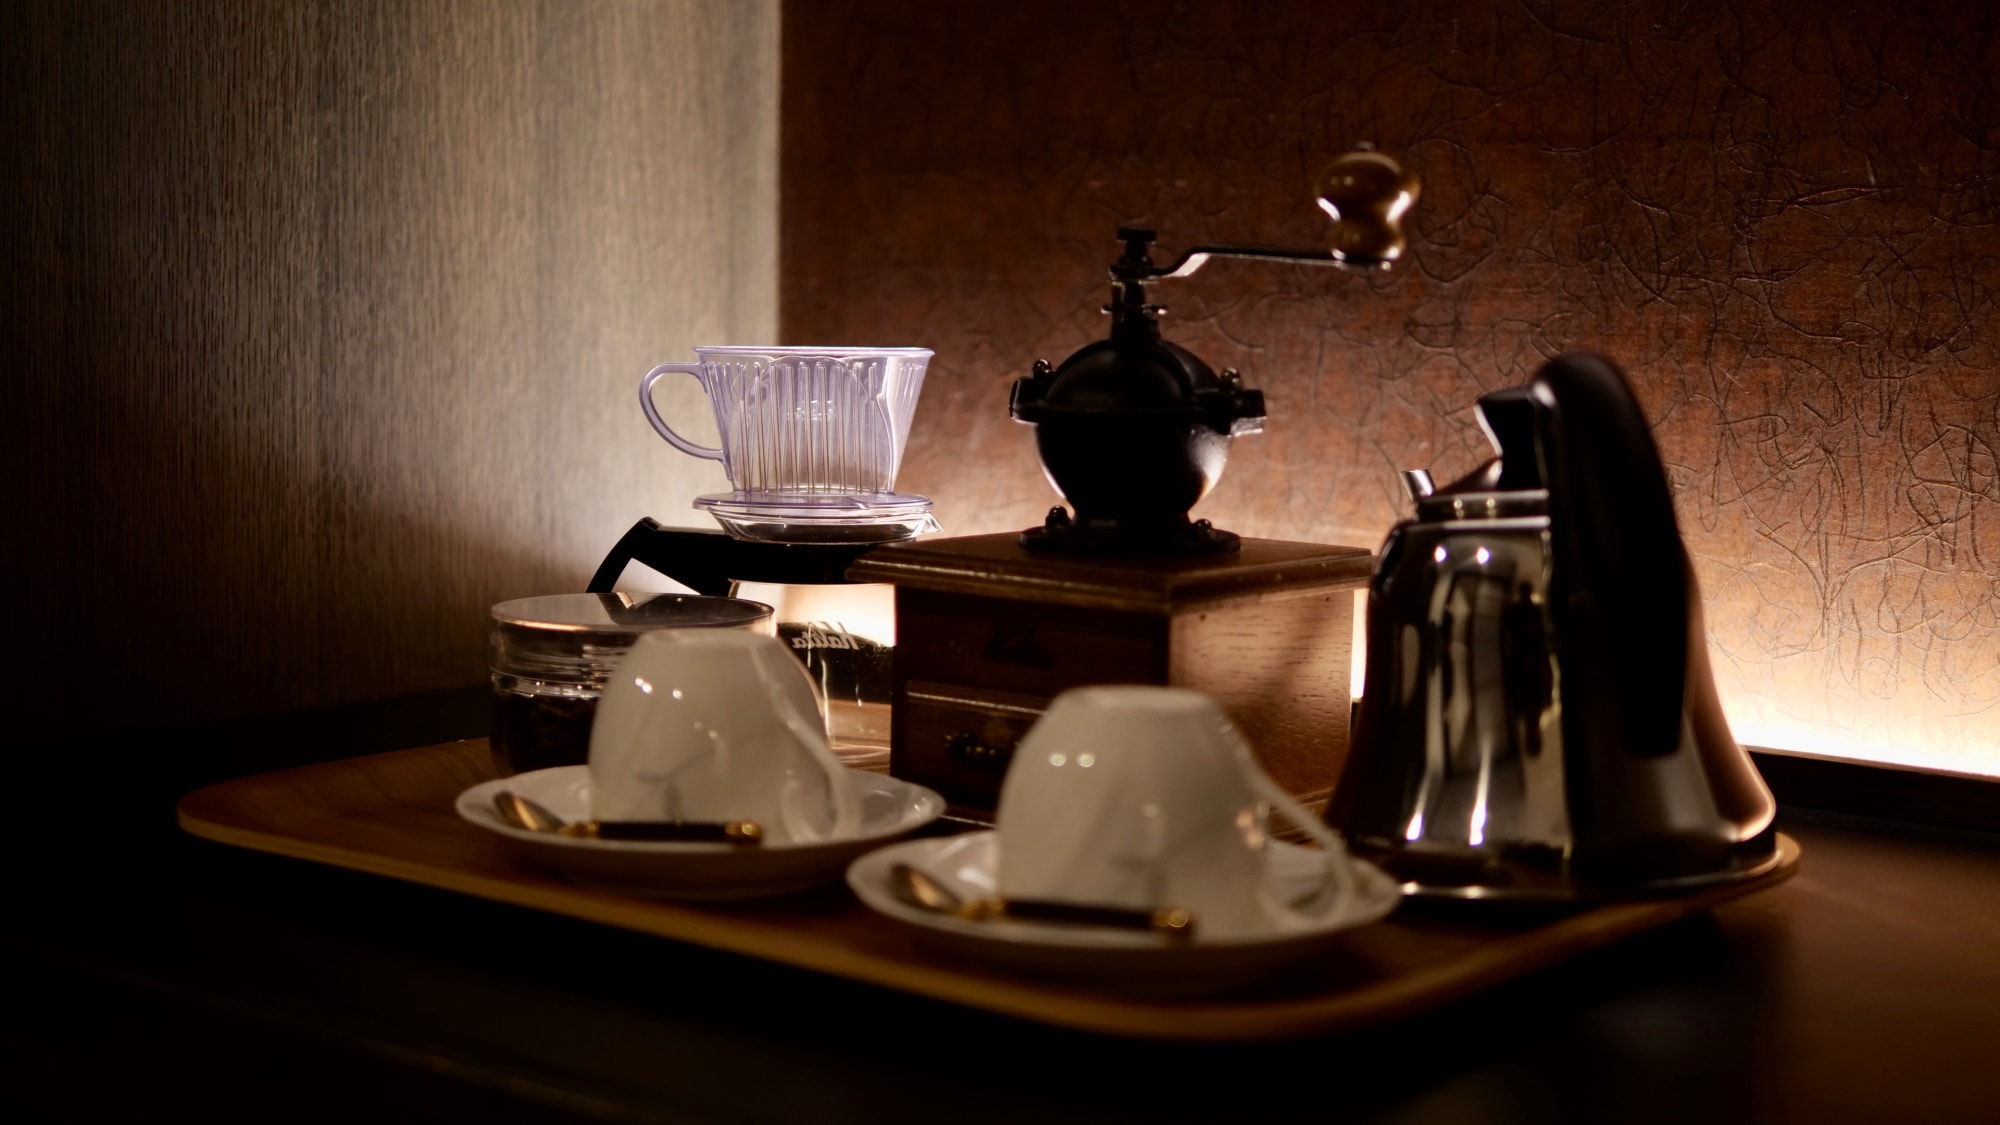 [Suzuran] Coffee Beans & Mill - Enjoy an elegant stay in the guest room - Luxury Suite (non-smoking)